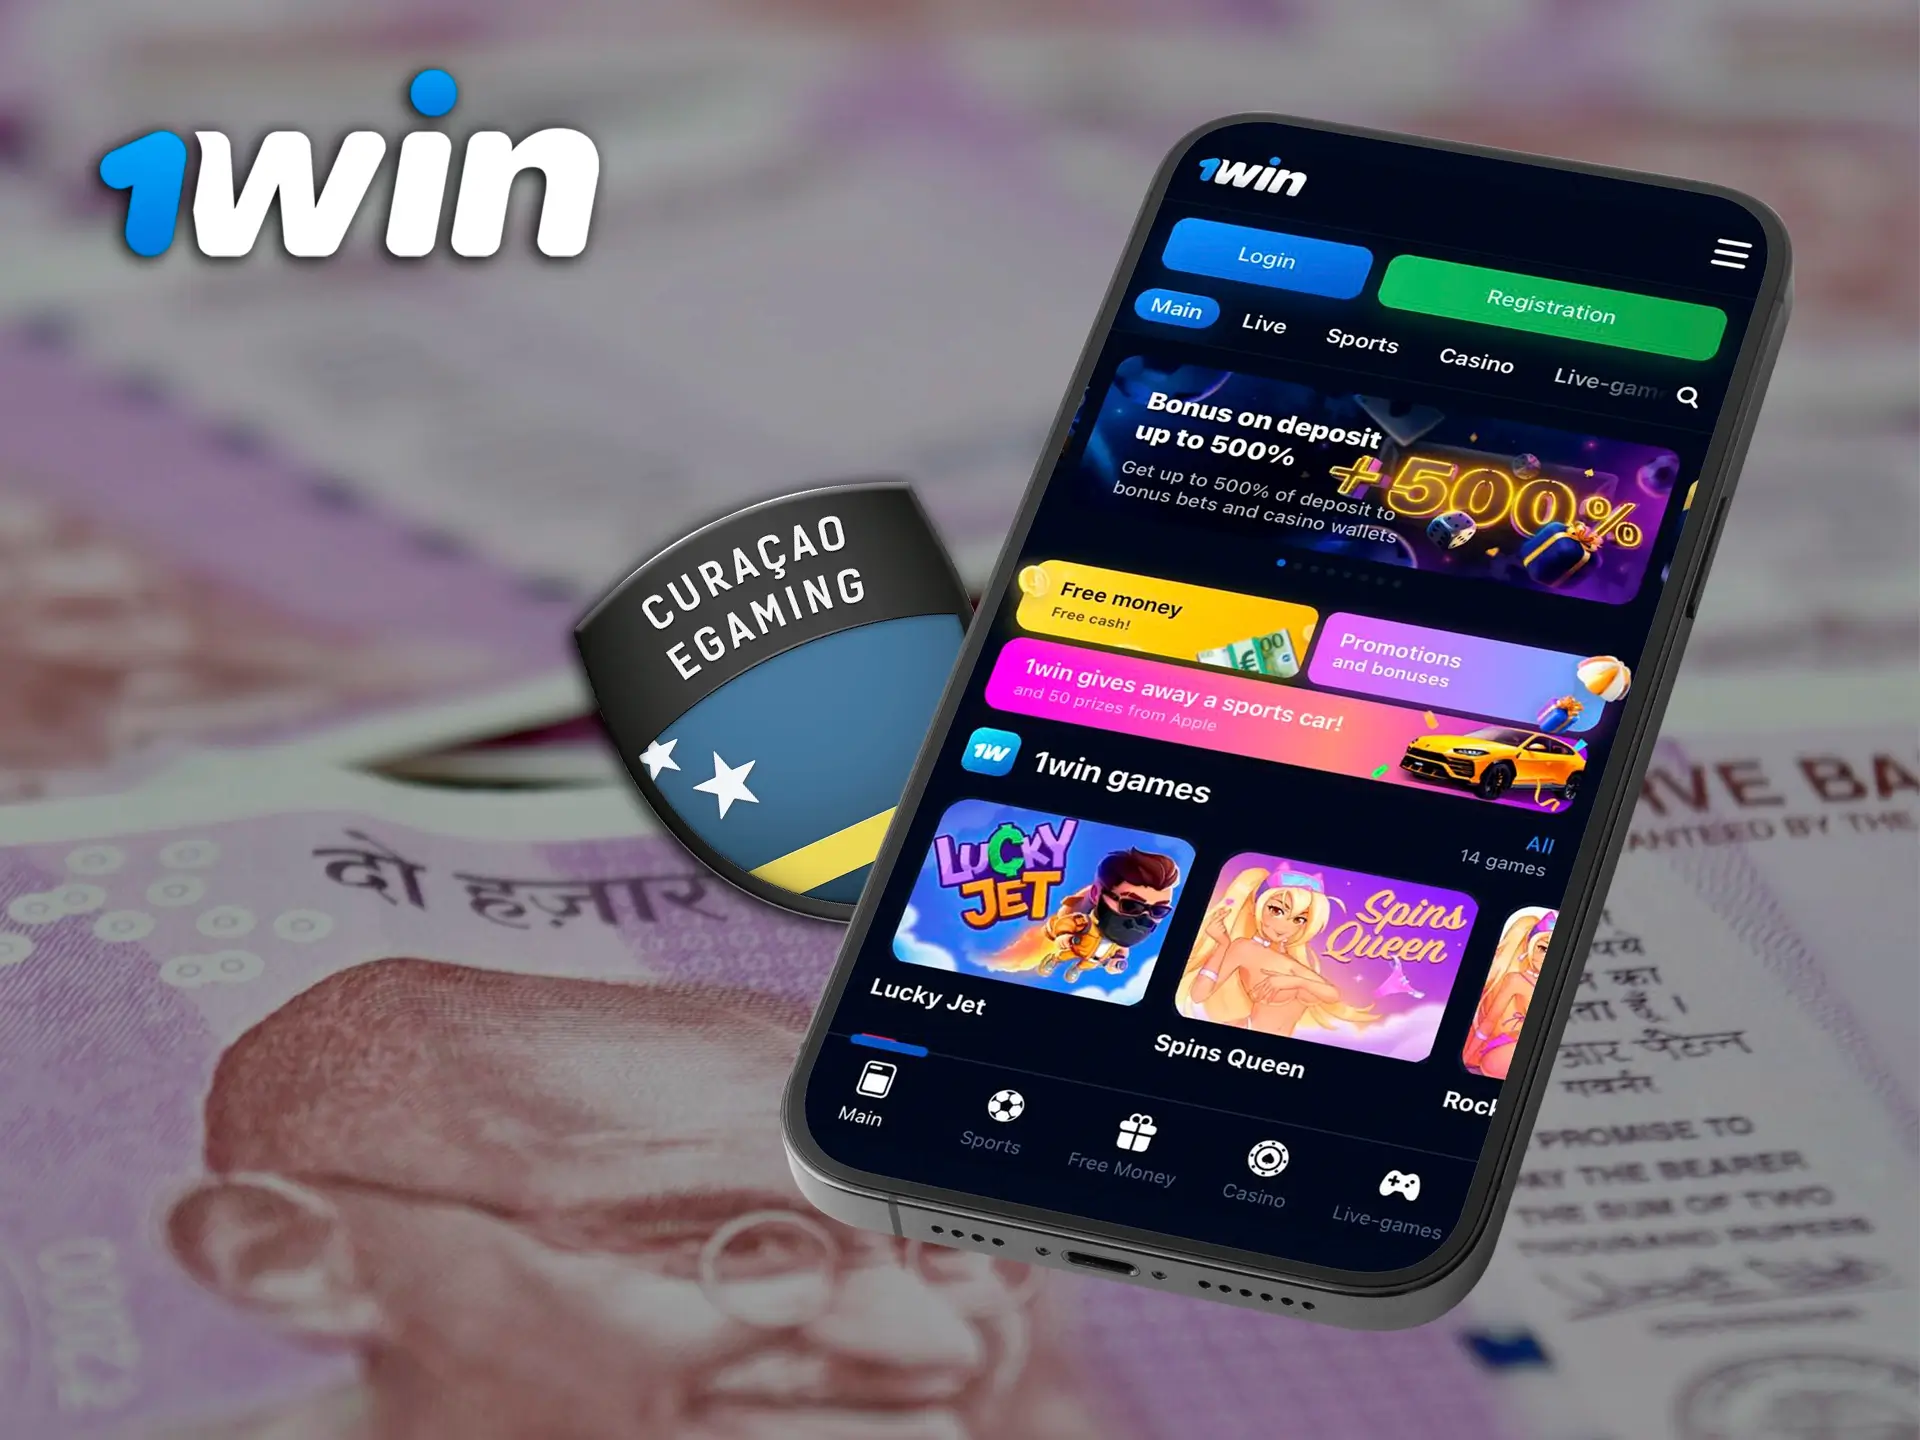 The 1Win app is licensed and has all the features for withdrawals.